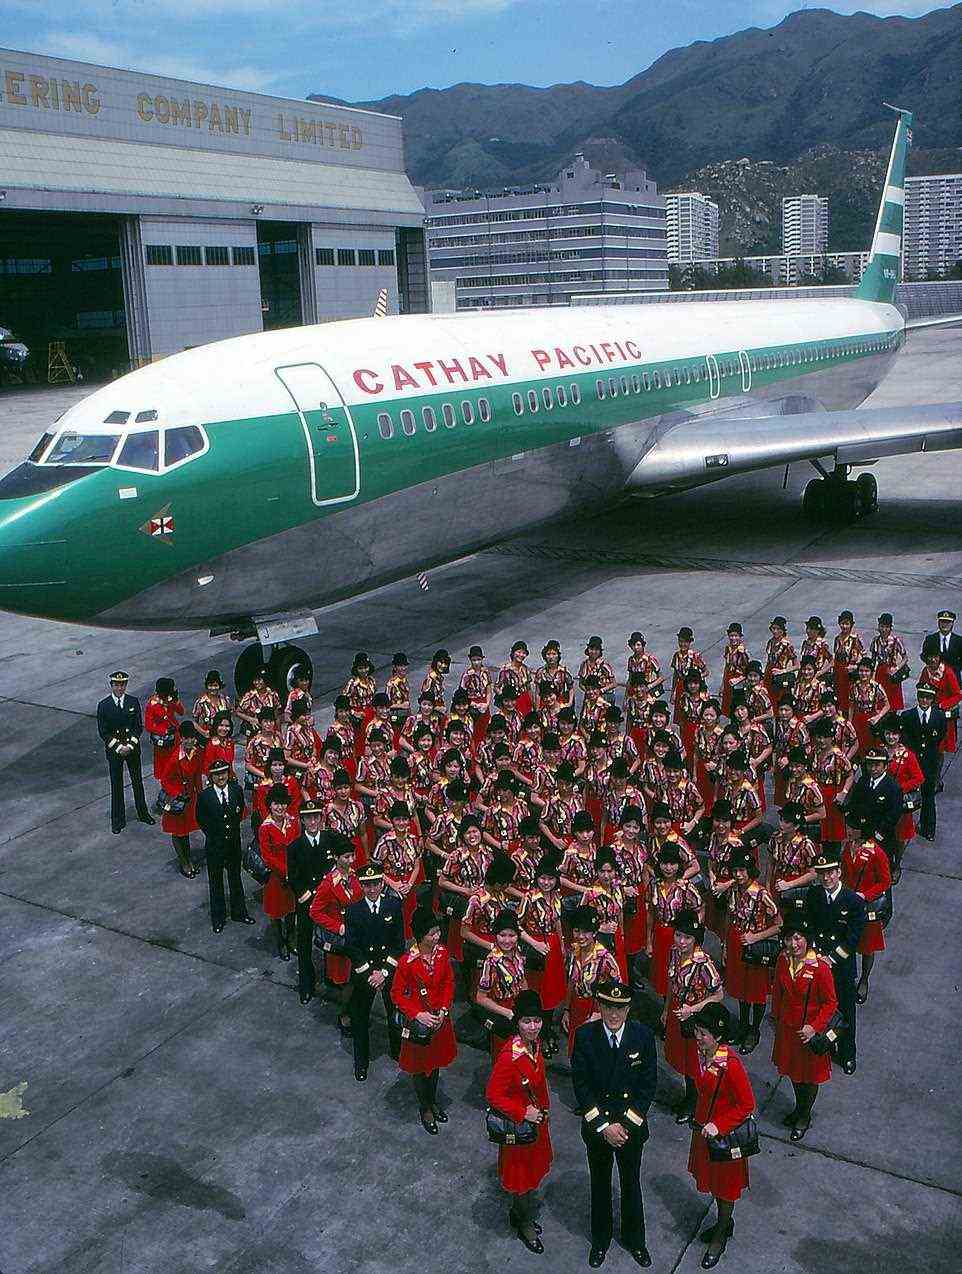 Further fleet and network expansion was seen in the early 1970s. Seen here, the brand-new Boeing 707, with Cathay Pacific staff wearing a brand-new uniform called the Eastern Sea, designed by Pierre Balmain